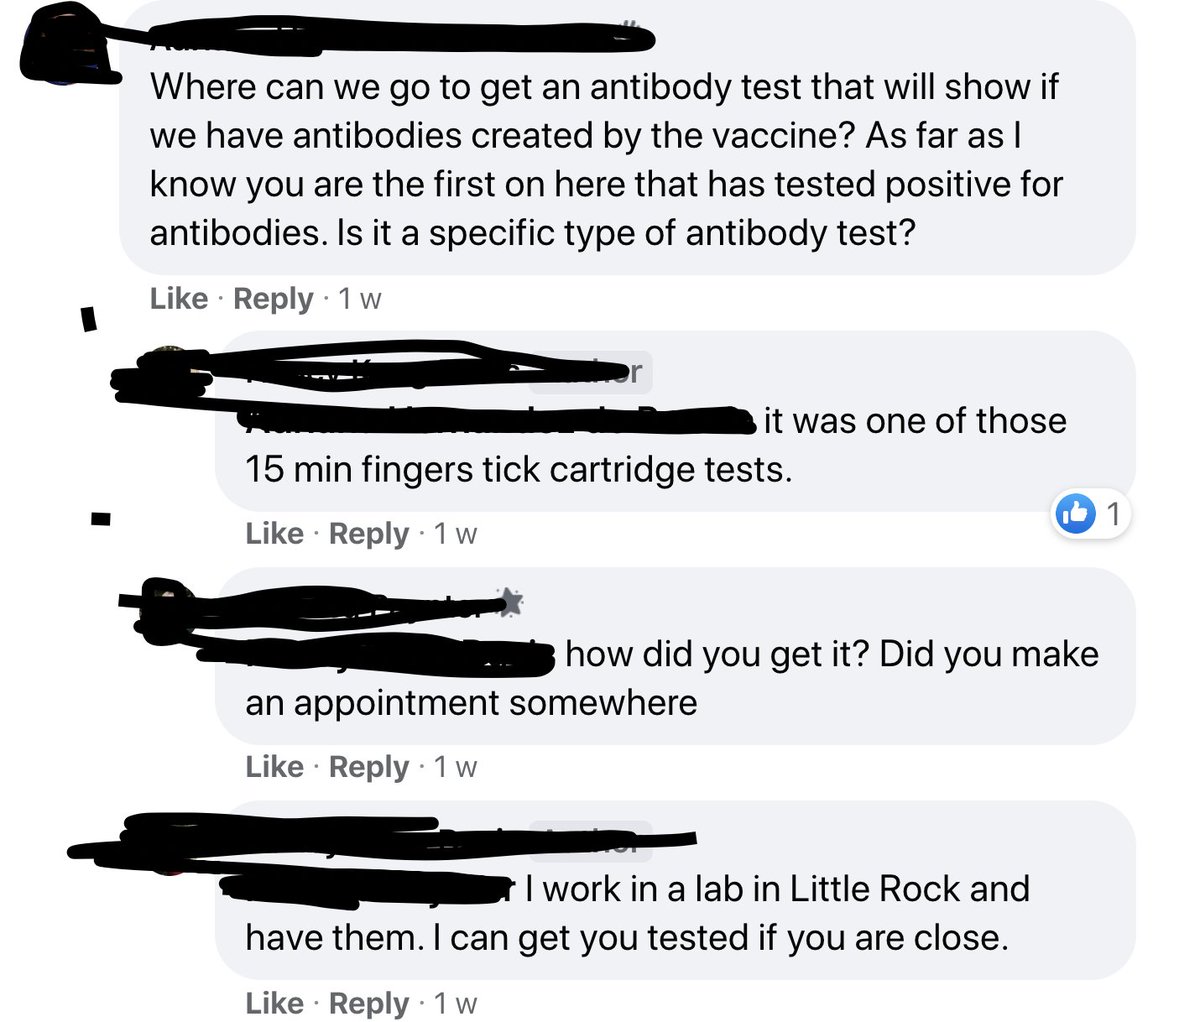 Look at this  @US_FDA - Pathologist enrolled in  @moderna_tx vax trial posted on Facebook that she got tested during trial, advised others where to get tested & offered to give other trial volunteers antibody test from her private lab! Double-blind protection obliterated. /22